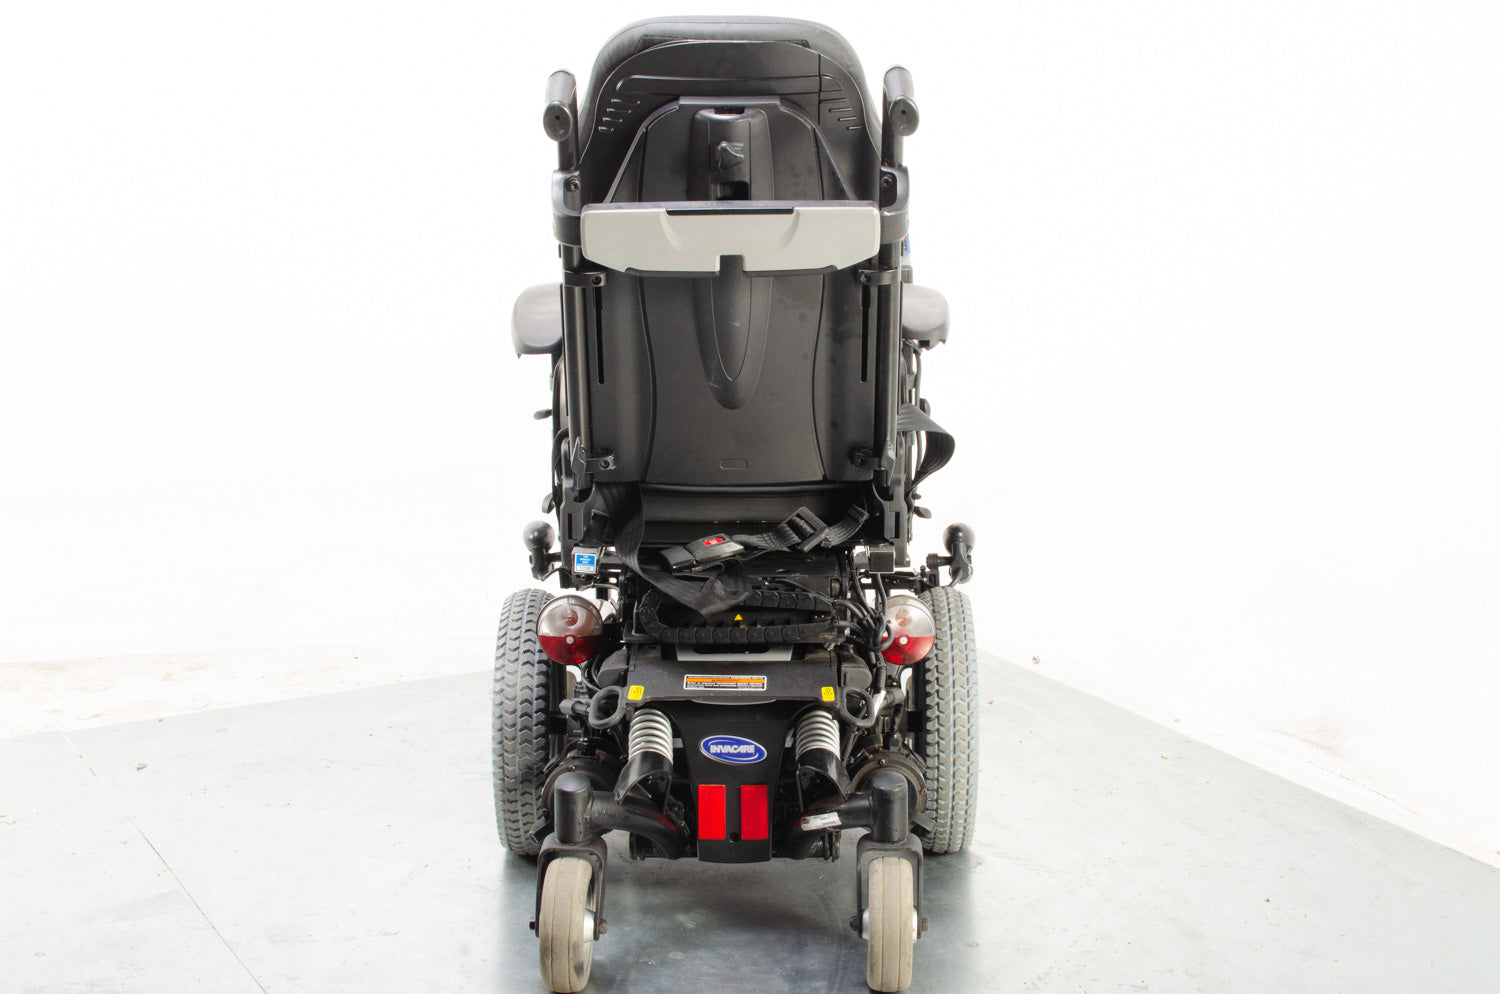 Invacare TDX SP Electric Wheelchair Powerchair Powered Riser Manual Elevating Leg Rests